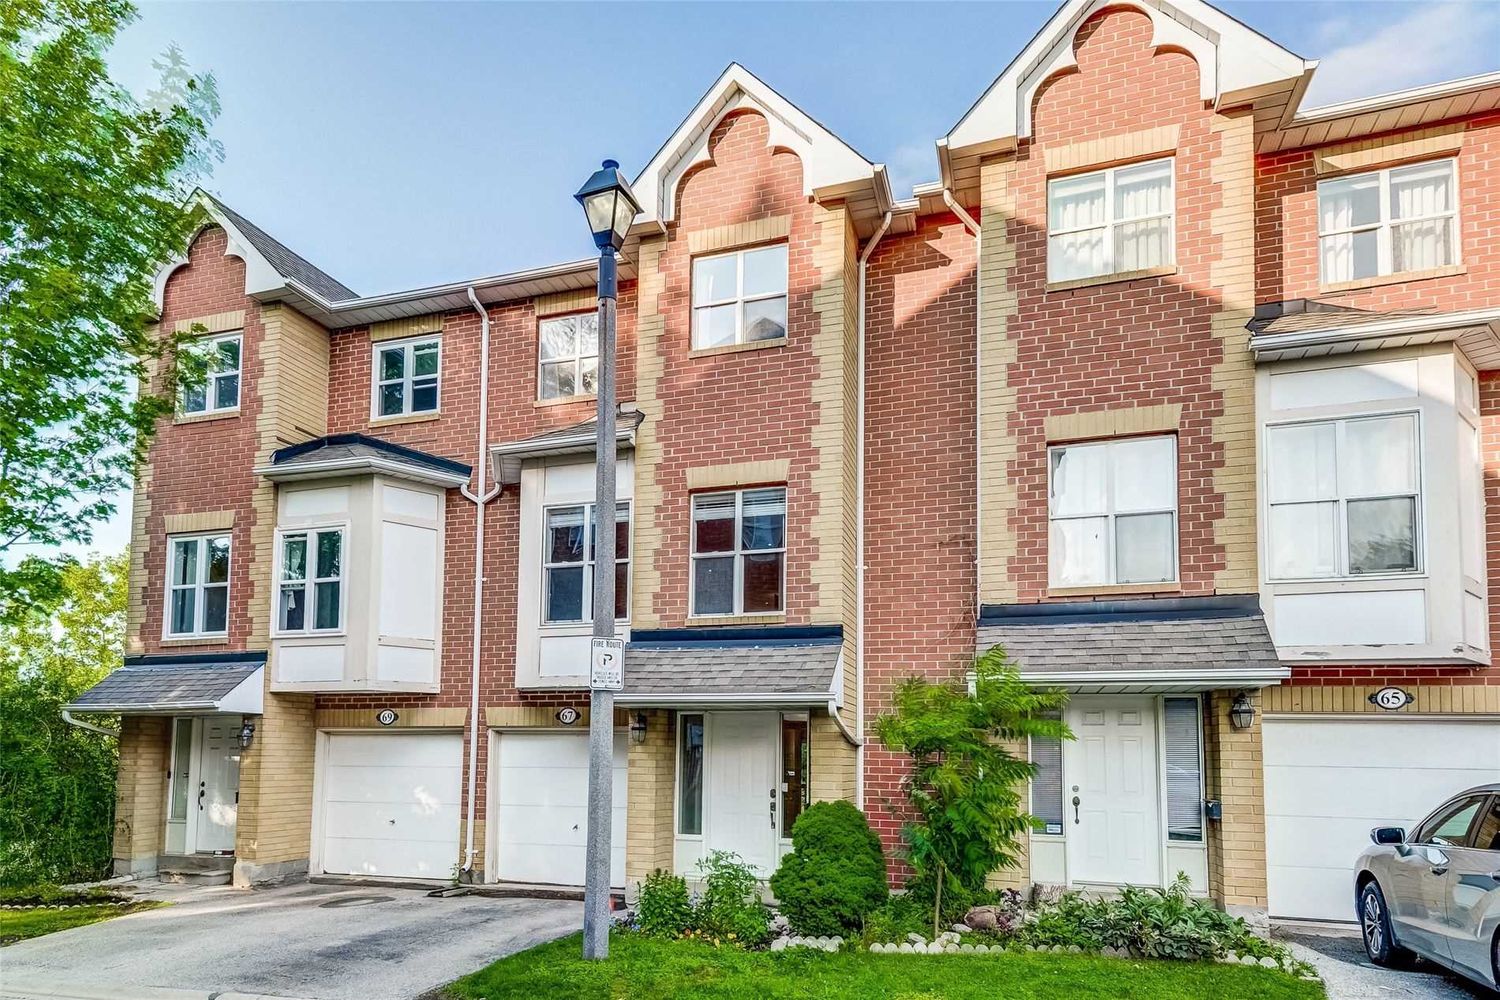 1-150 Maple Park Way. Maple Park Way Townhomes is located in  Markham, Toronto - image #3 of 3